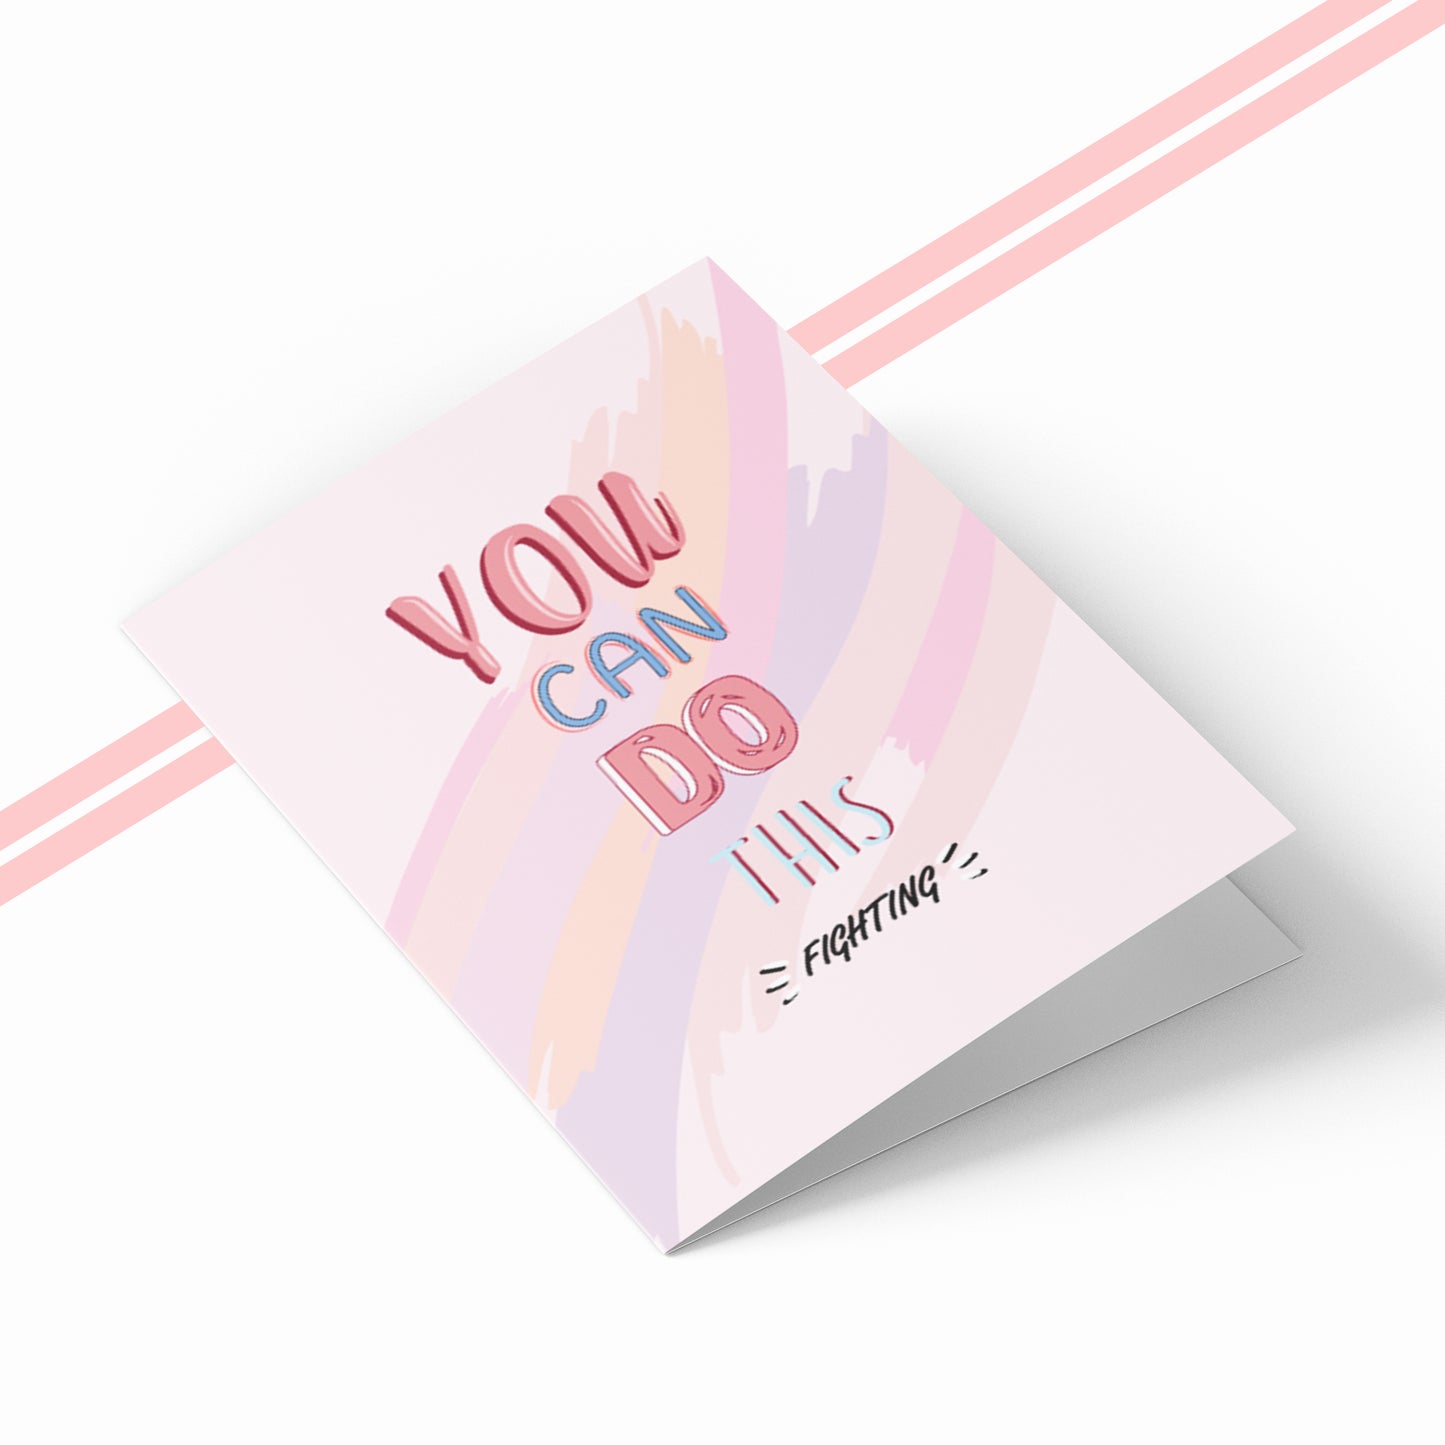 You Can Do This - Motivational Card